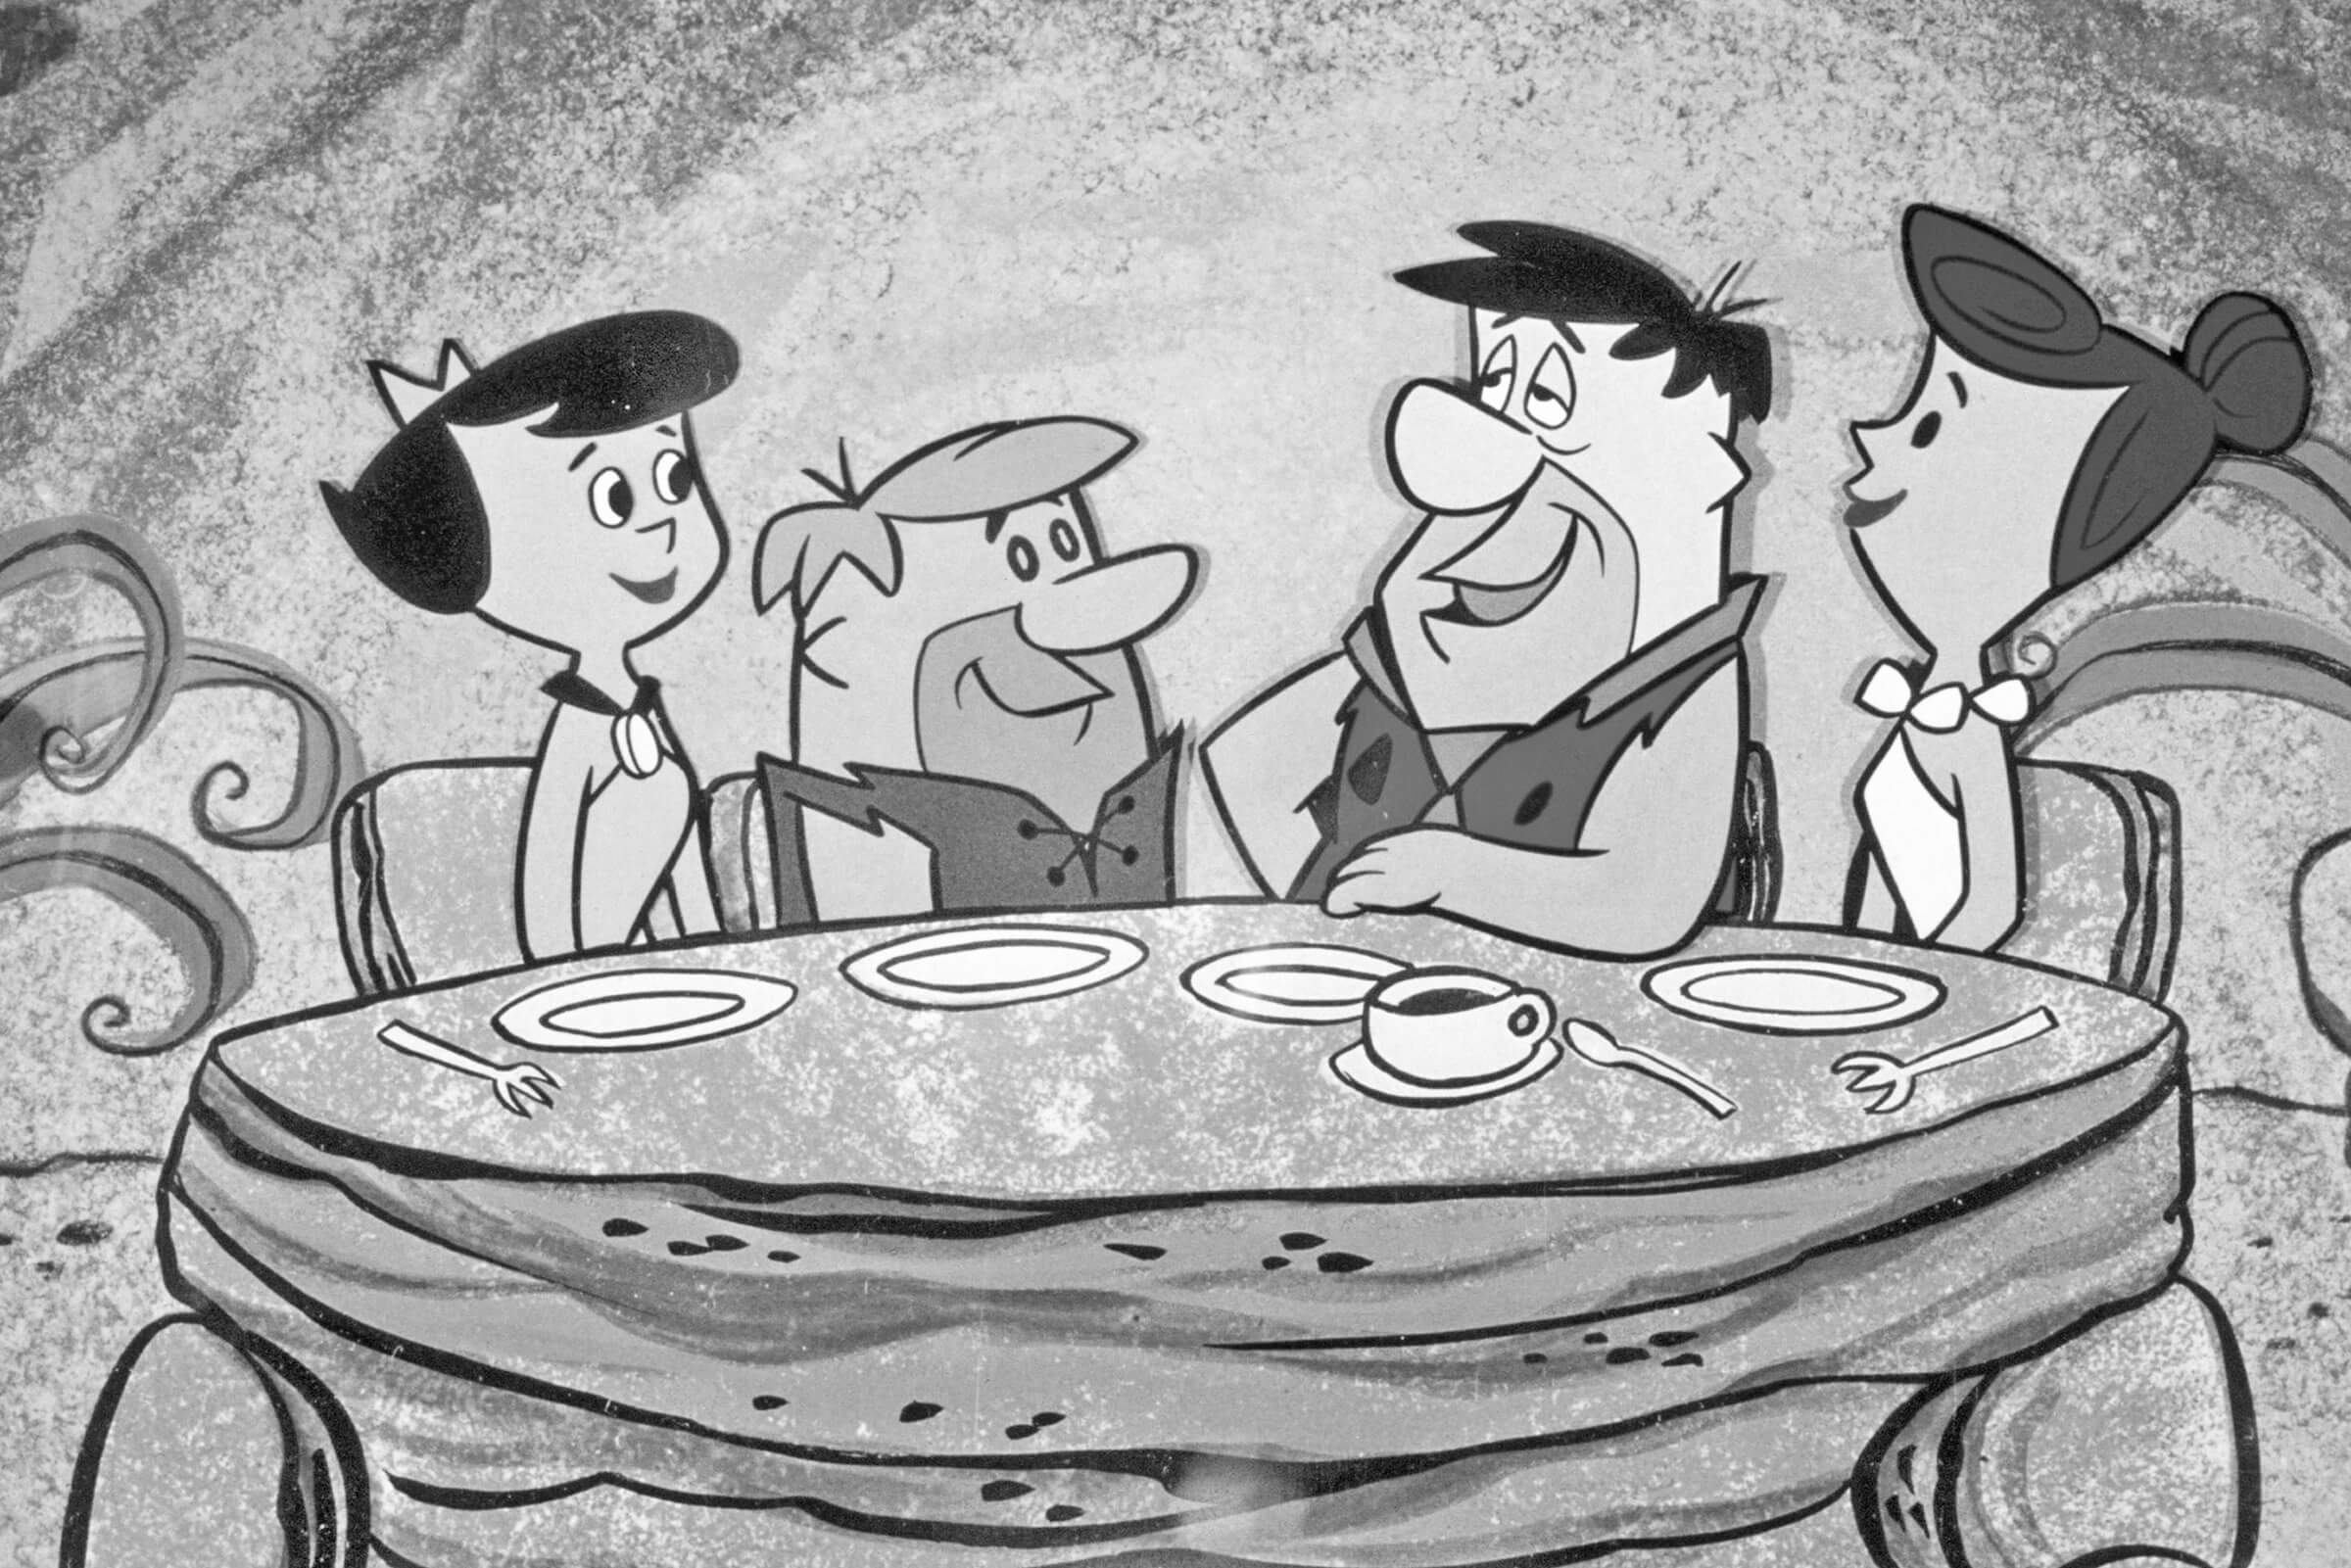 Yabba Dabba Do! A Brief History of “The Flintstones” | Interesting Facts